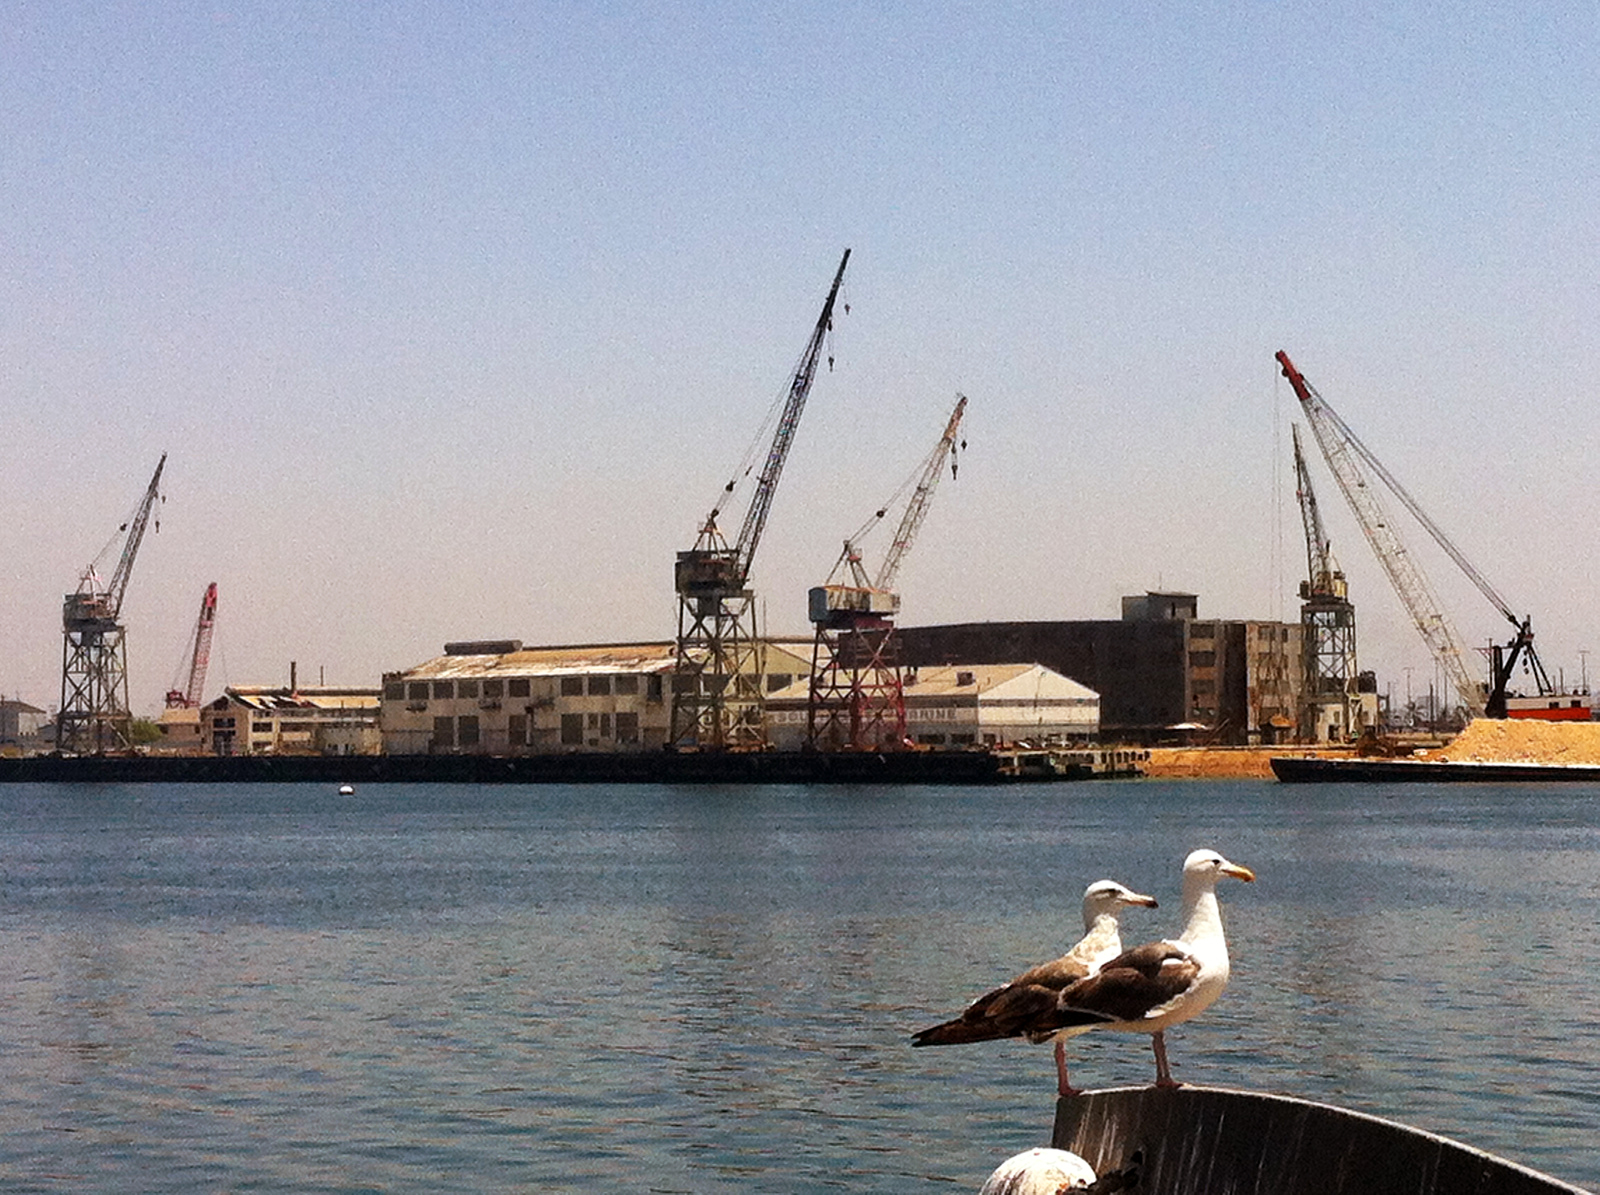 View of two seagulls and terminal island